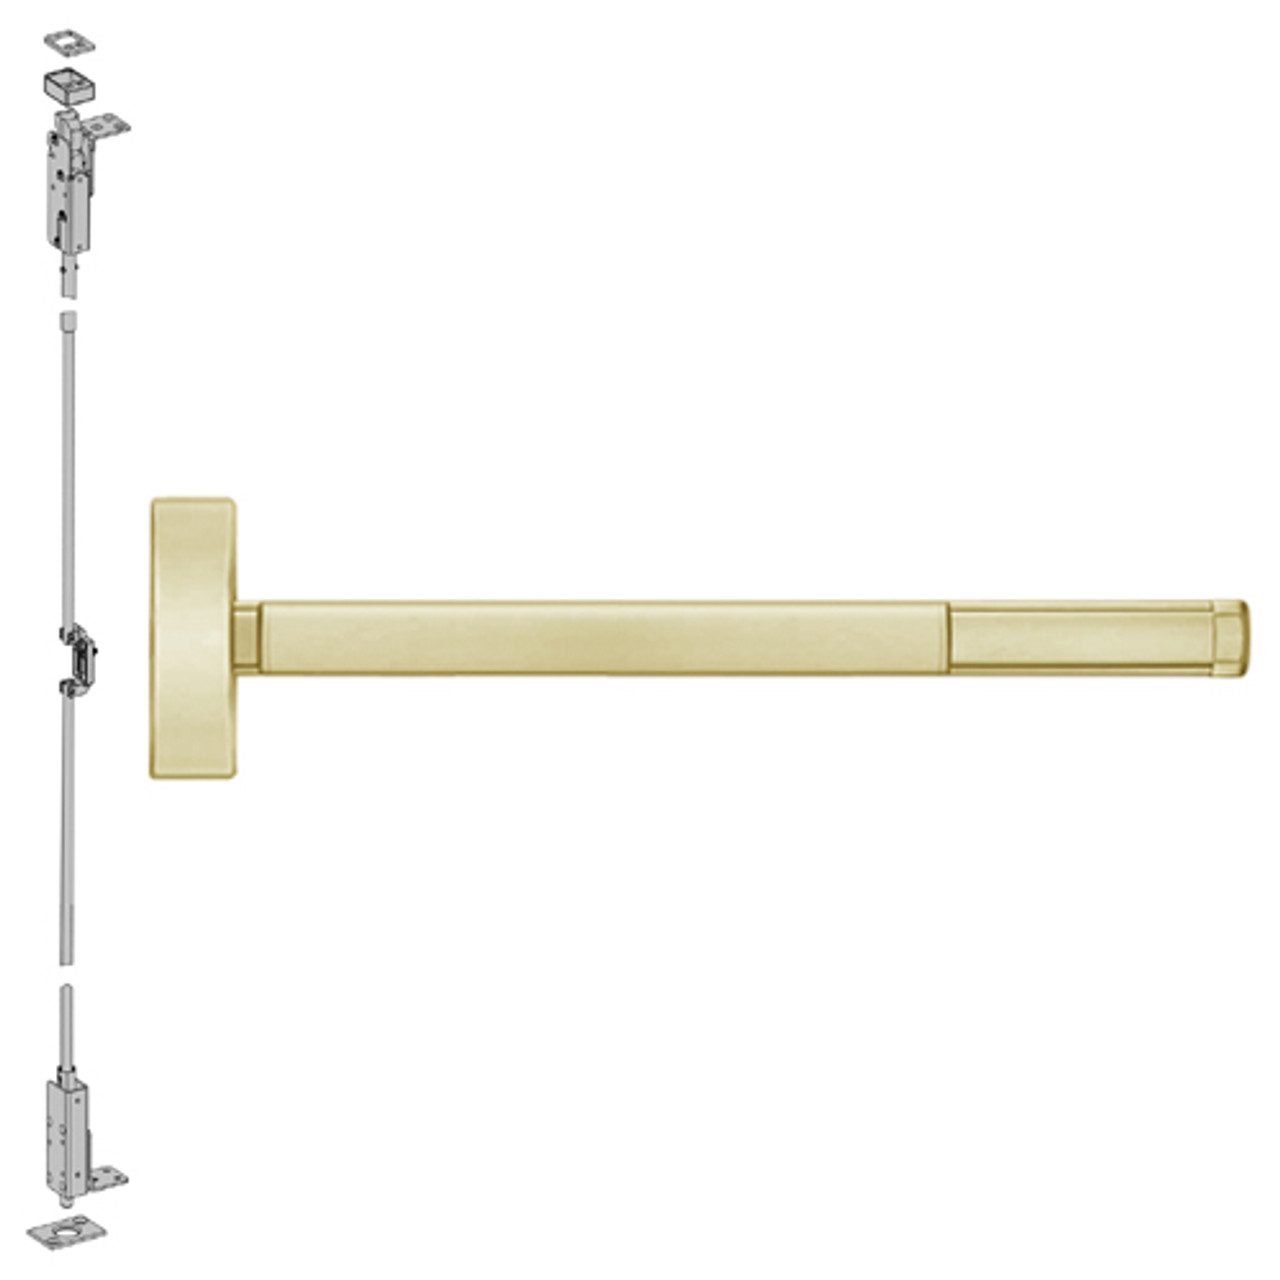 TS2701-606-36 PHI 2700 Series Wood Door Concealed Vertical Exit Device with Touchbar Monitoring Switch Prepped for Cover Plate in Satin Brass Finish